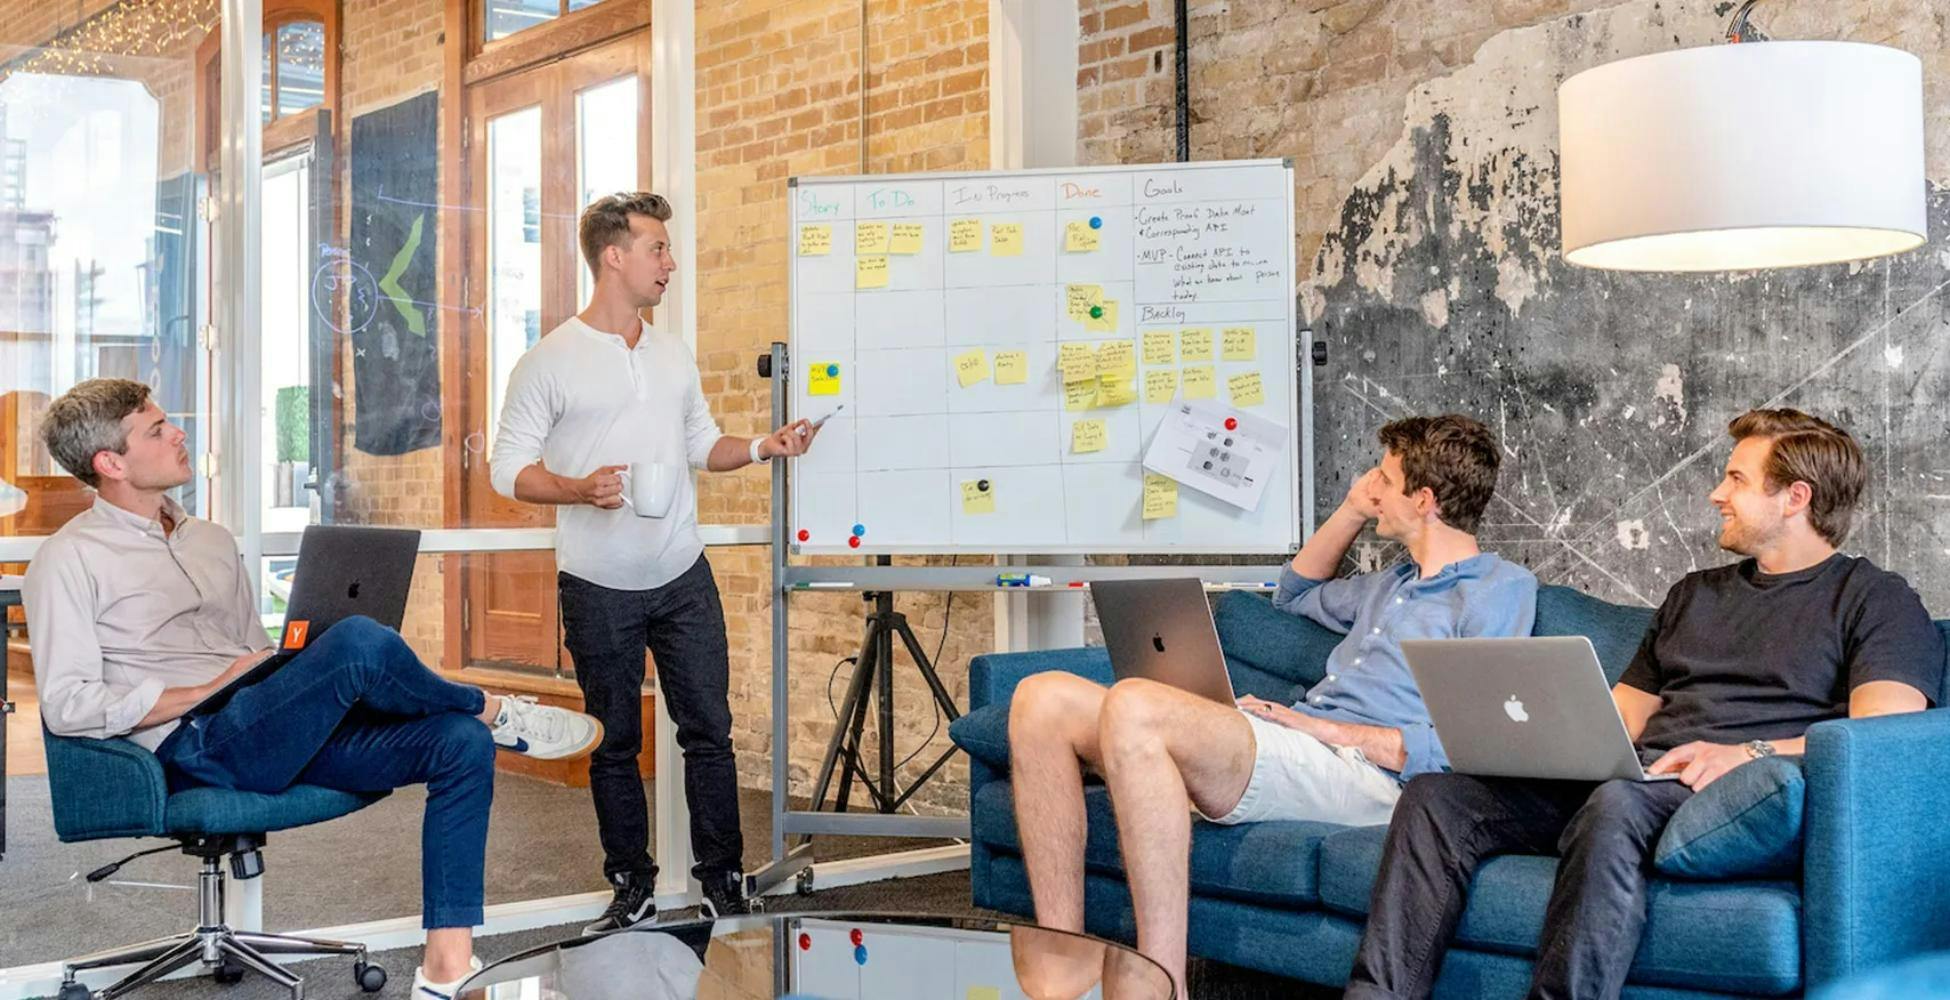 3 men sitting around looking at another man presenting on a whiteboard